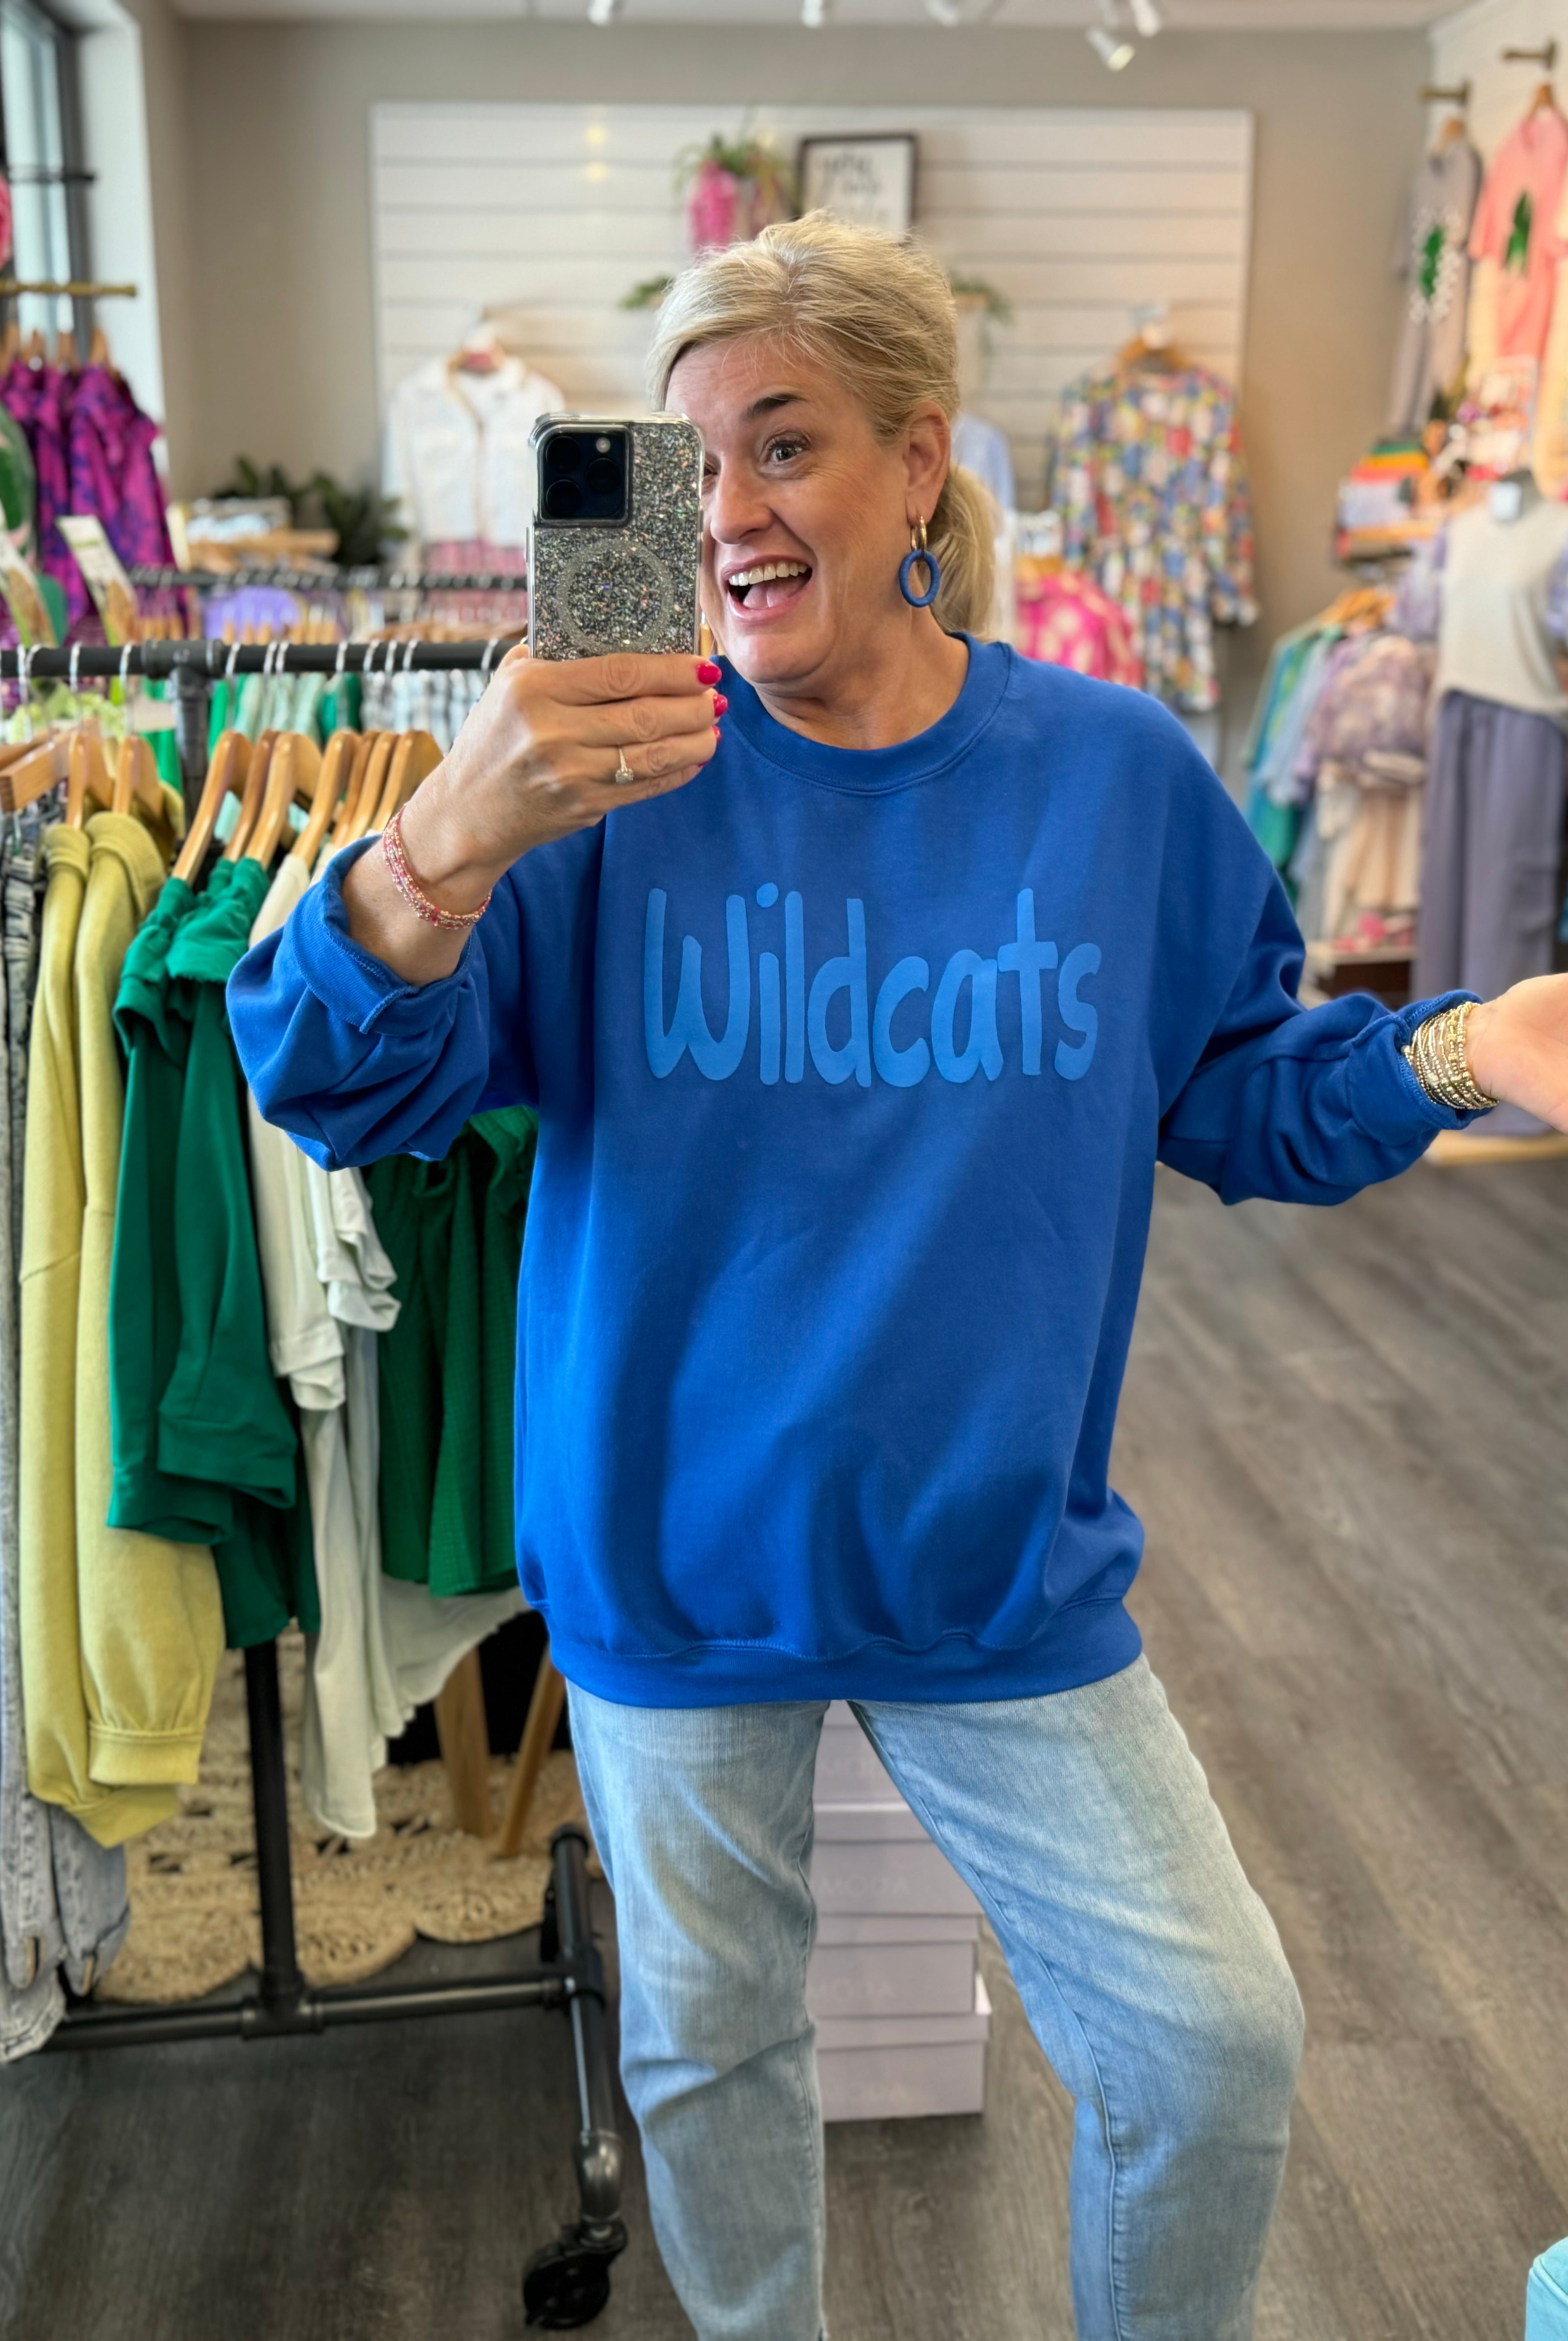 Deal of the Day Wildcats Crewneck-150 Sweatshirts-The Lovely Closet-The Lovely Closet, Women's Fashion Boutique in Alexandria, KY